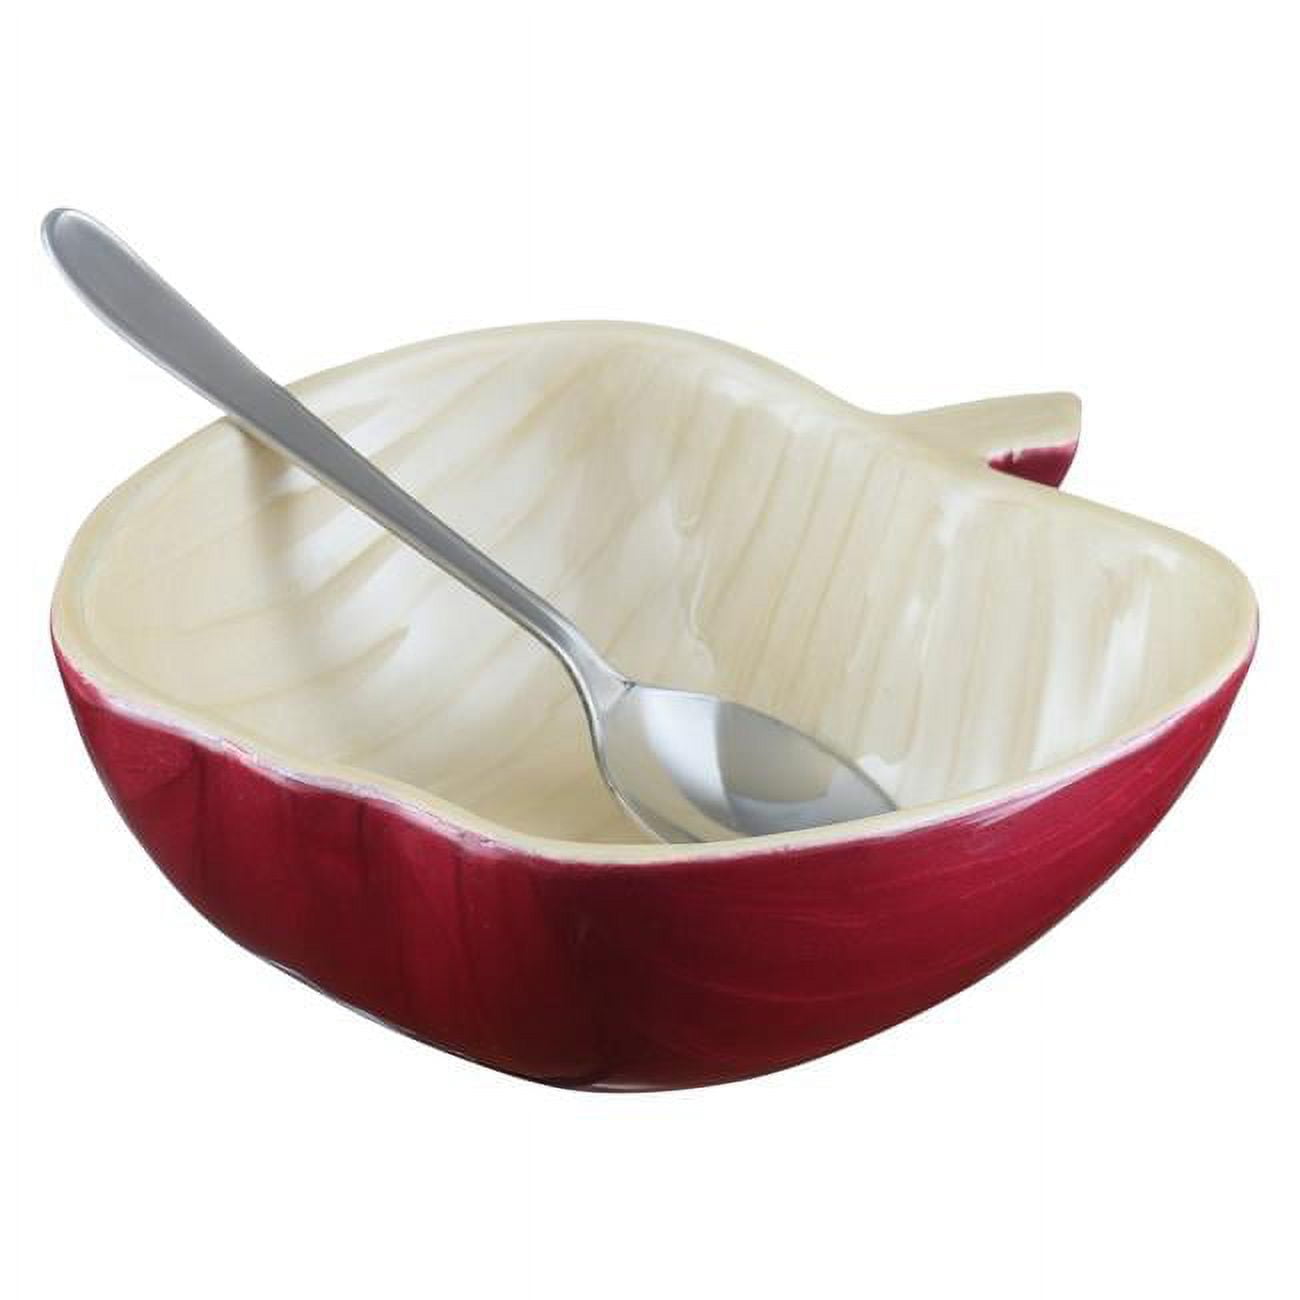 Picture of A&M Judaica & Gifts 59316 Nua Honey Dish Apple Shape Red Aluminum Spoon